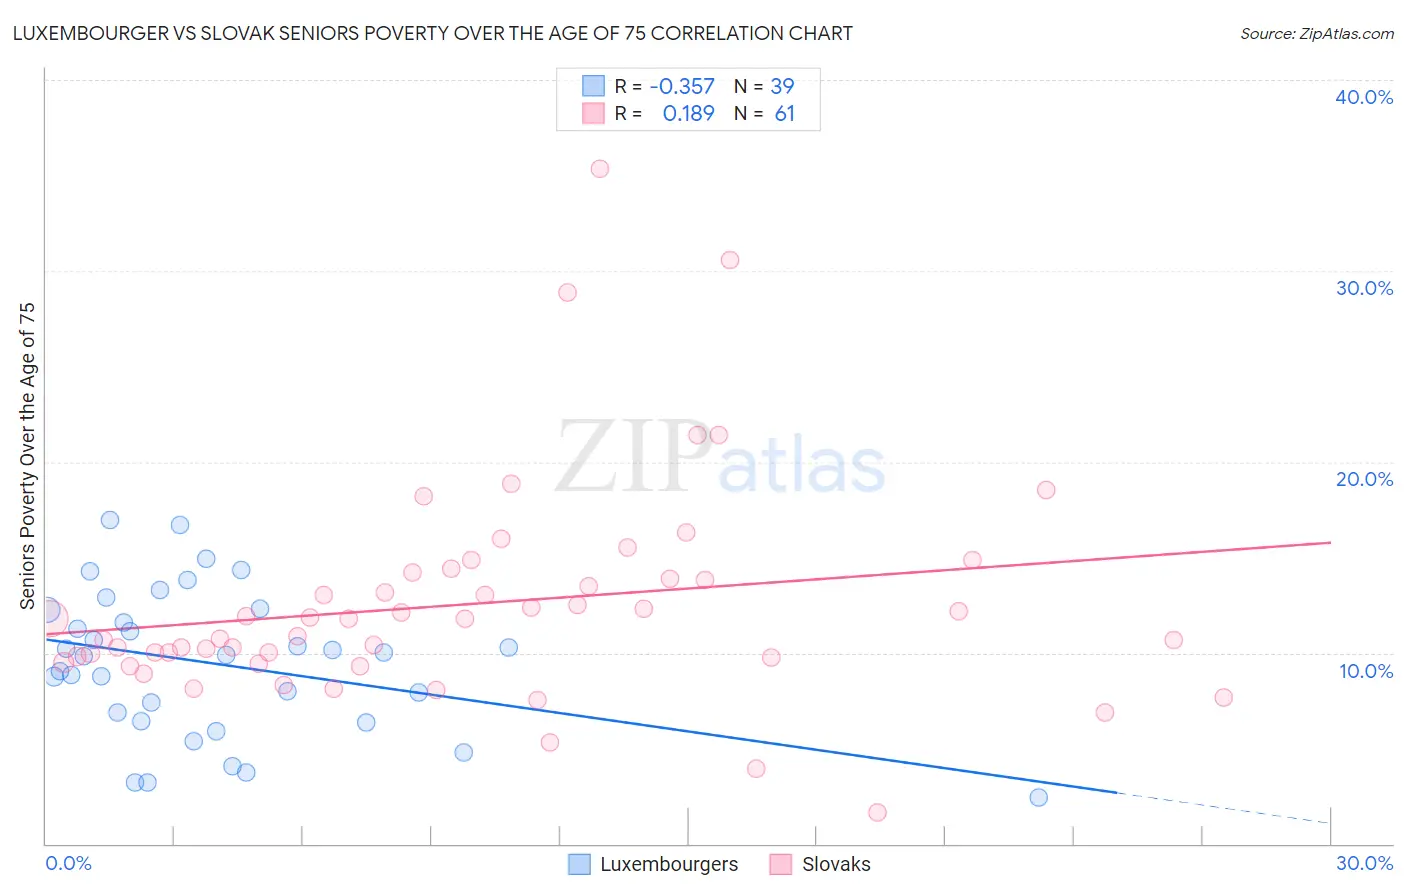 Luxembourger vs Slovak Seniors Poverty Over the Age of 75